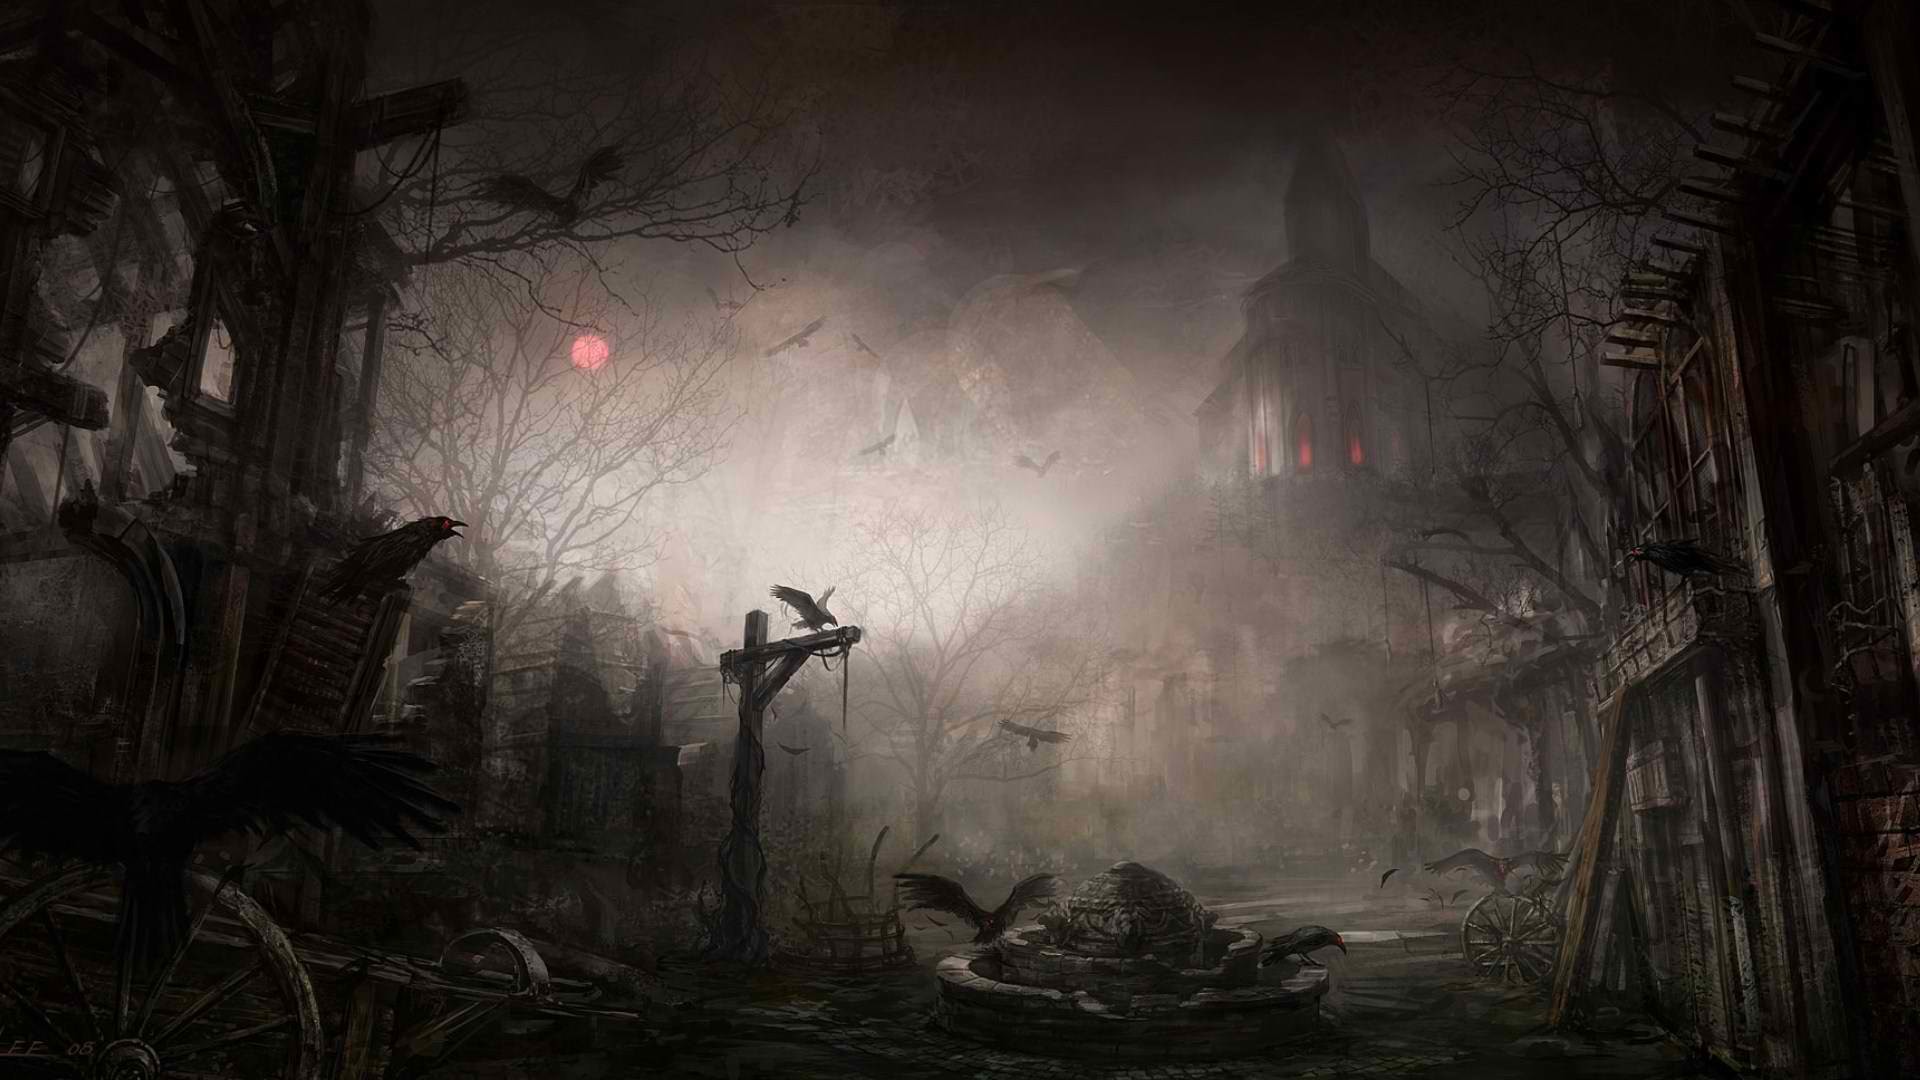 1920x1080 http://radojavor.deviantart.com/gallery/8353474/Halloween I have used these  wallpapers for years, most in here are from the linked artist. Amazing work